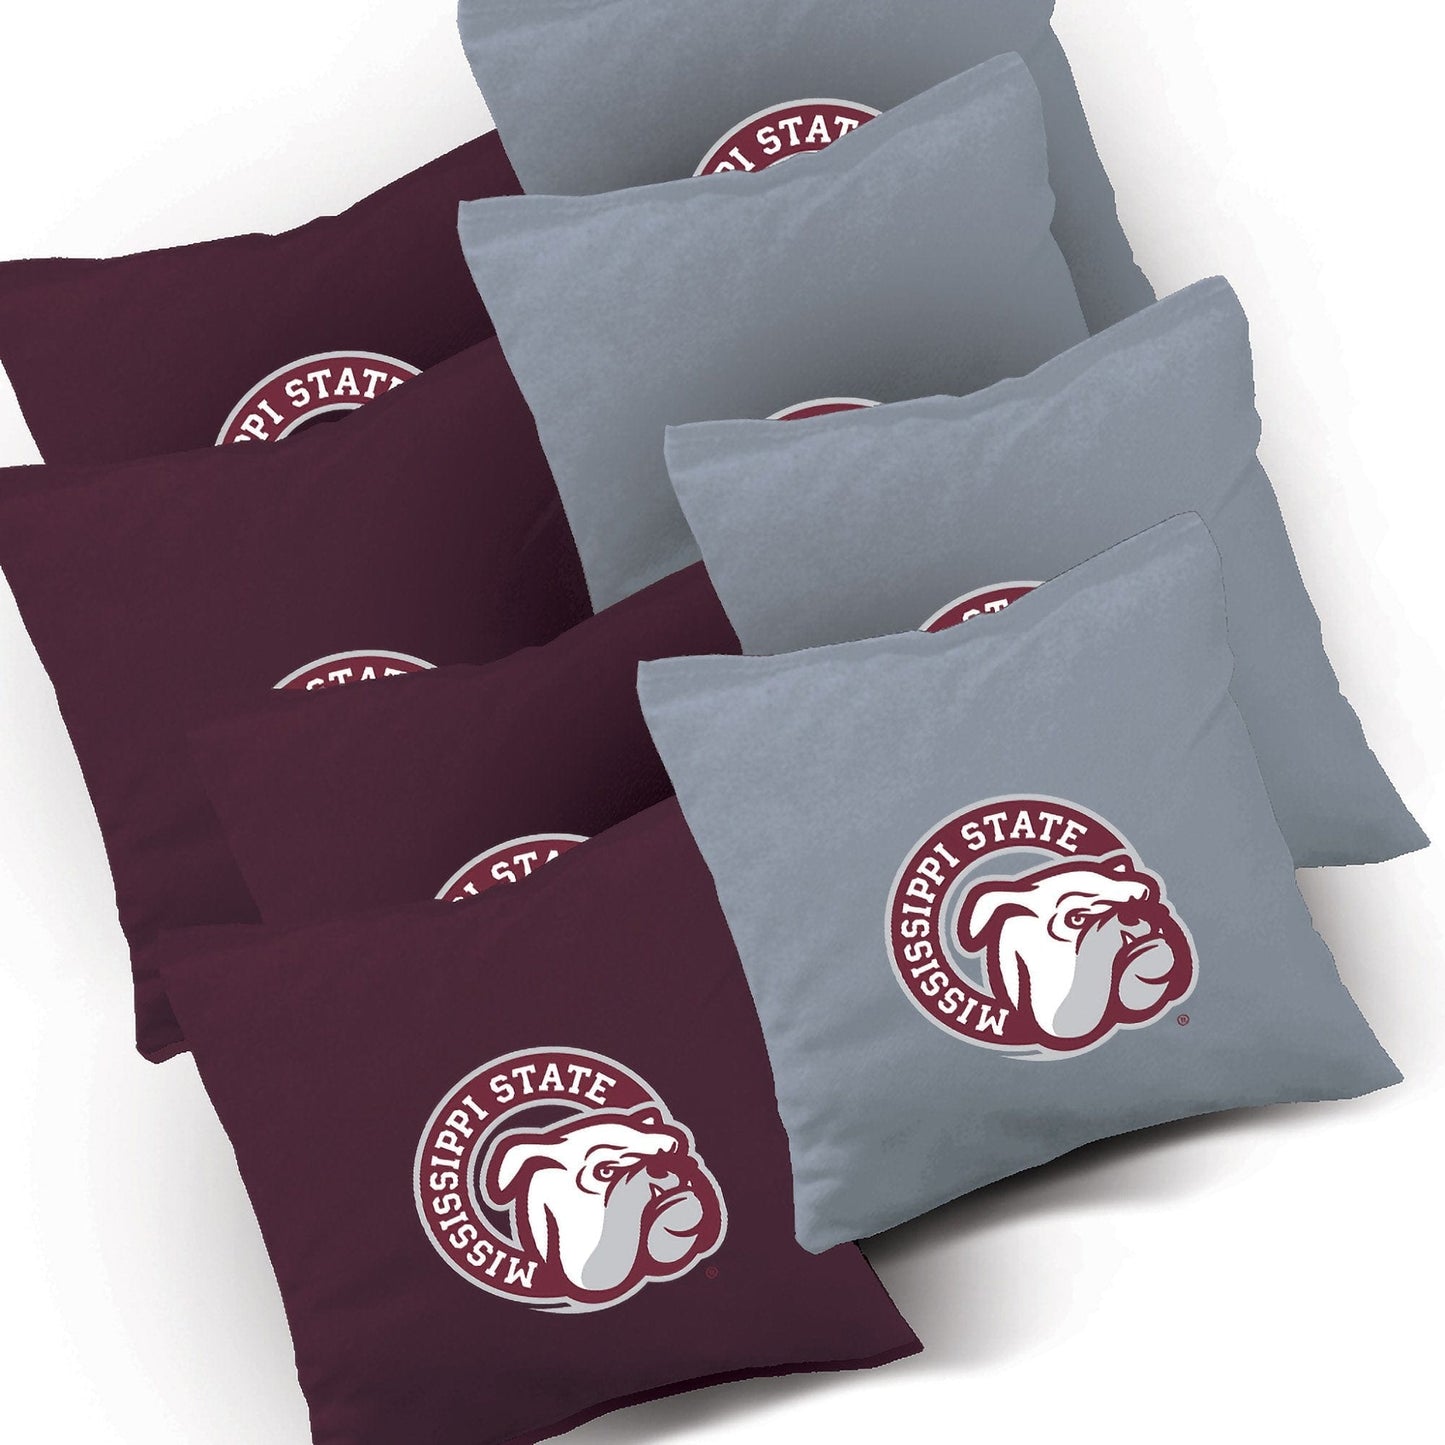 Mississippi State Bulldogs Jersey team logo corn hole bags